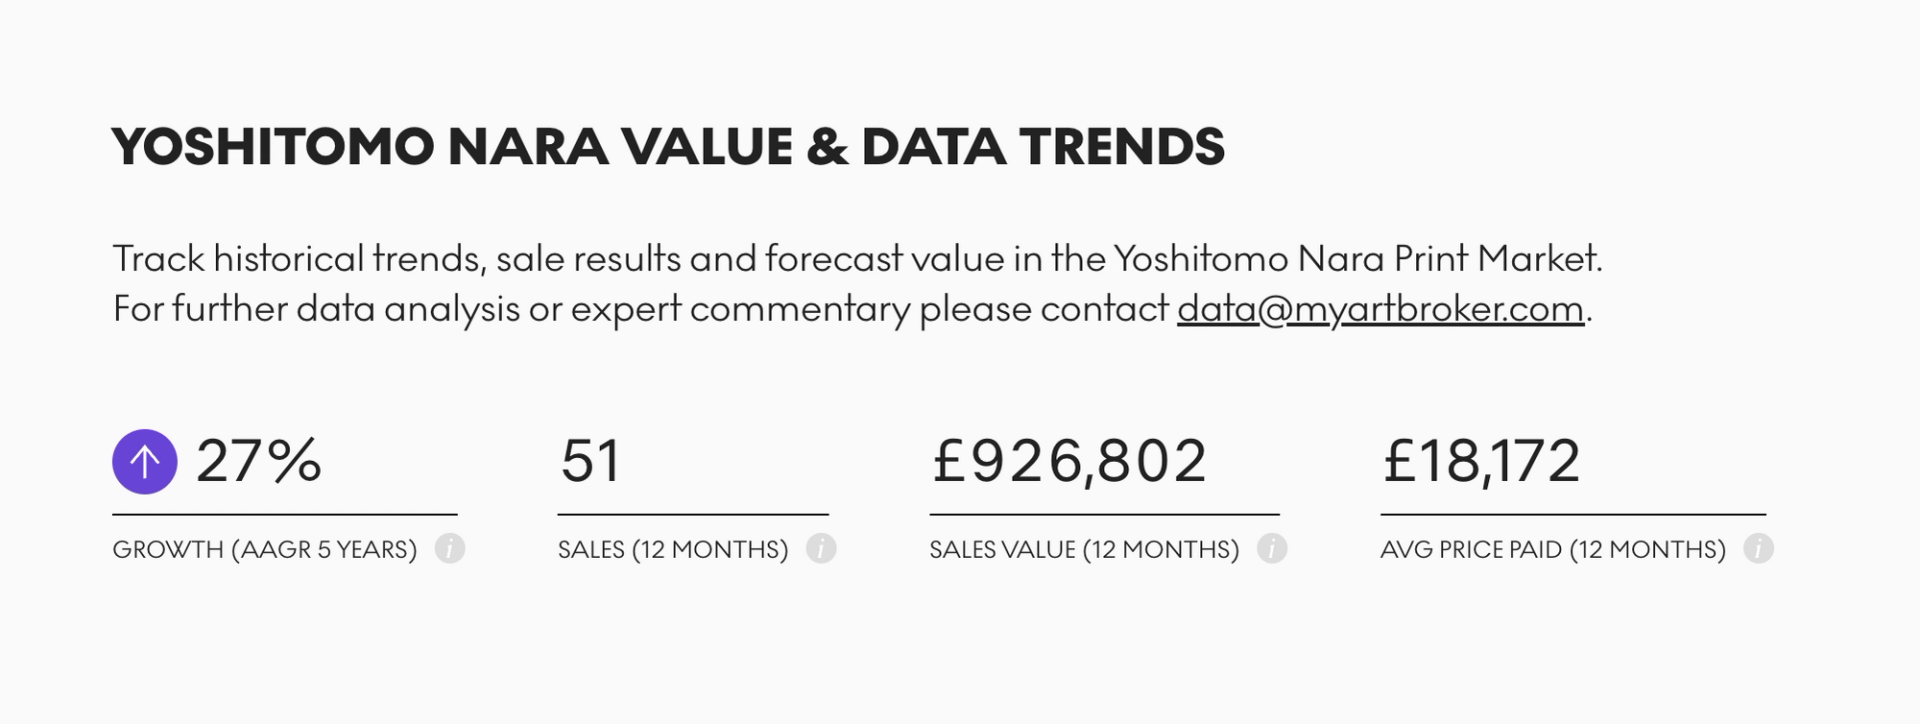 A screenshot of the MyArtBroker Yoshitomo Nara artwork page, displaying value & data trends which are as follows: 27% Growth (AAGR 5 years), 51 Sales (12 months), £926,802 Sales Value (12 months) and £18,172 AVG Price Paid (12 months)